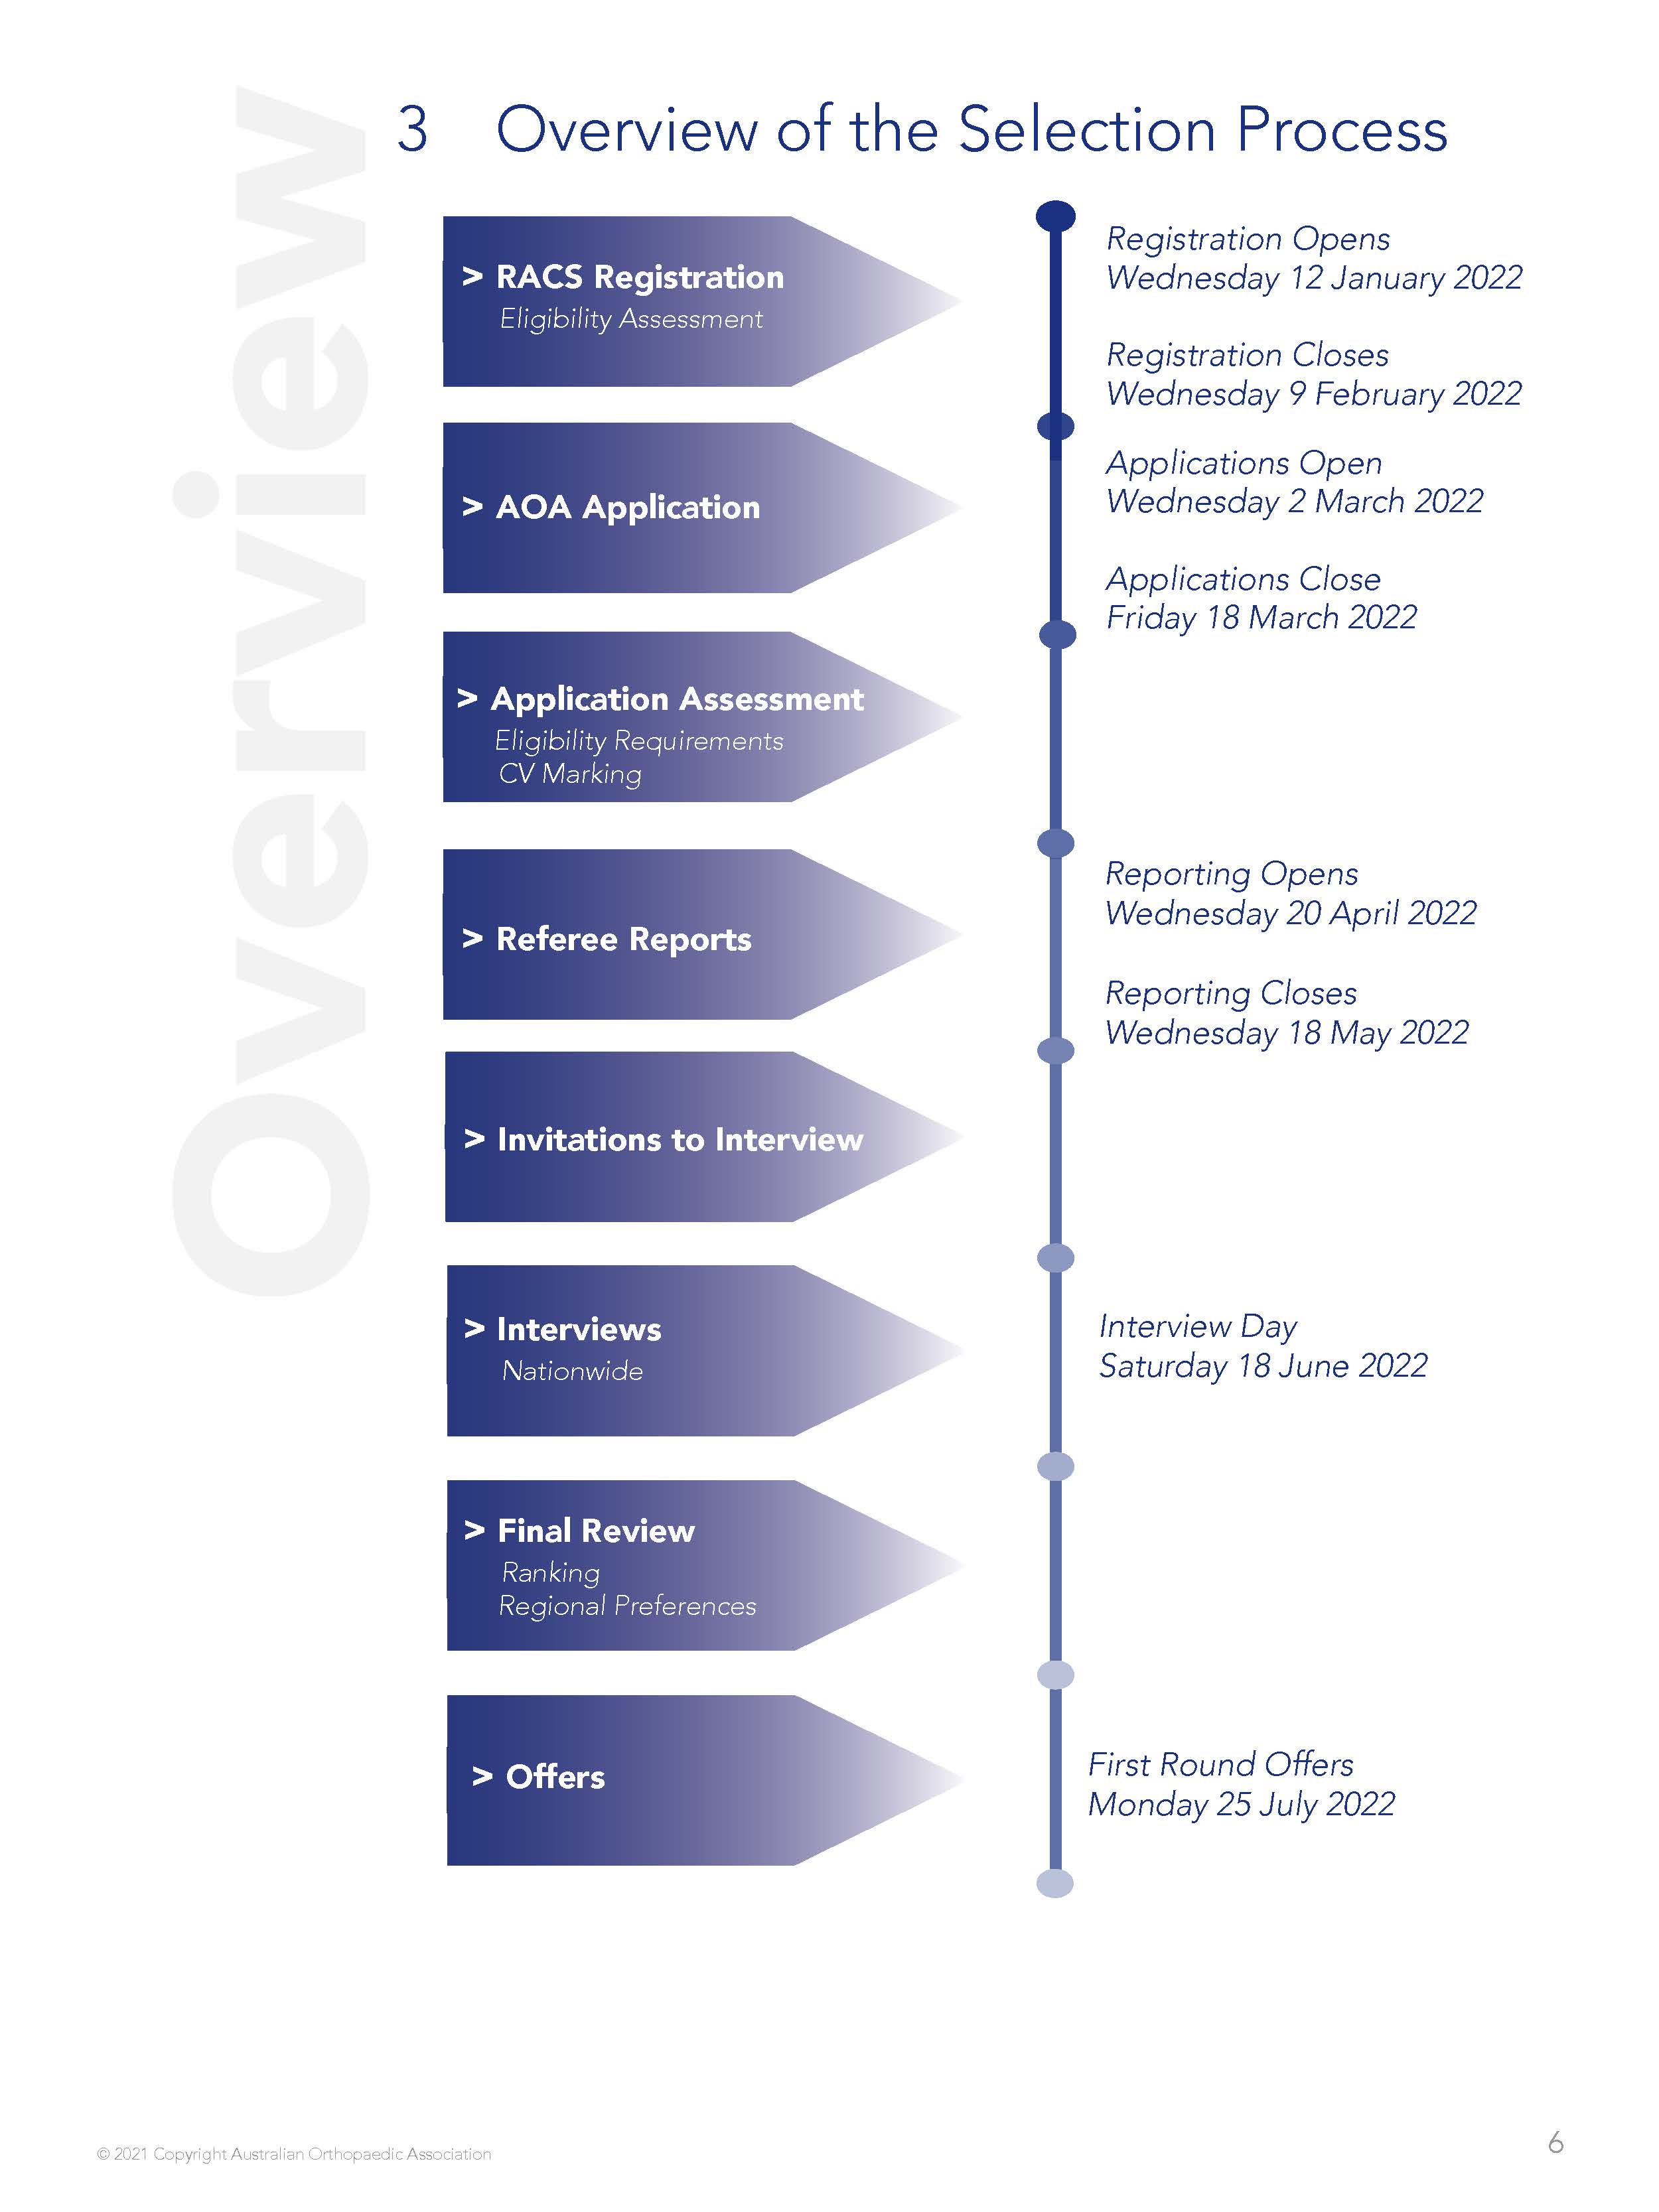 A timeline for the AOA training selection process